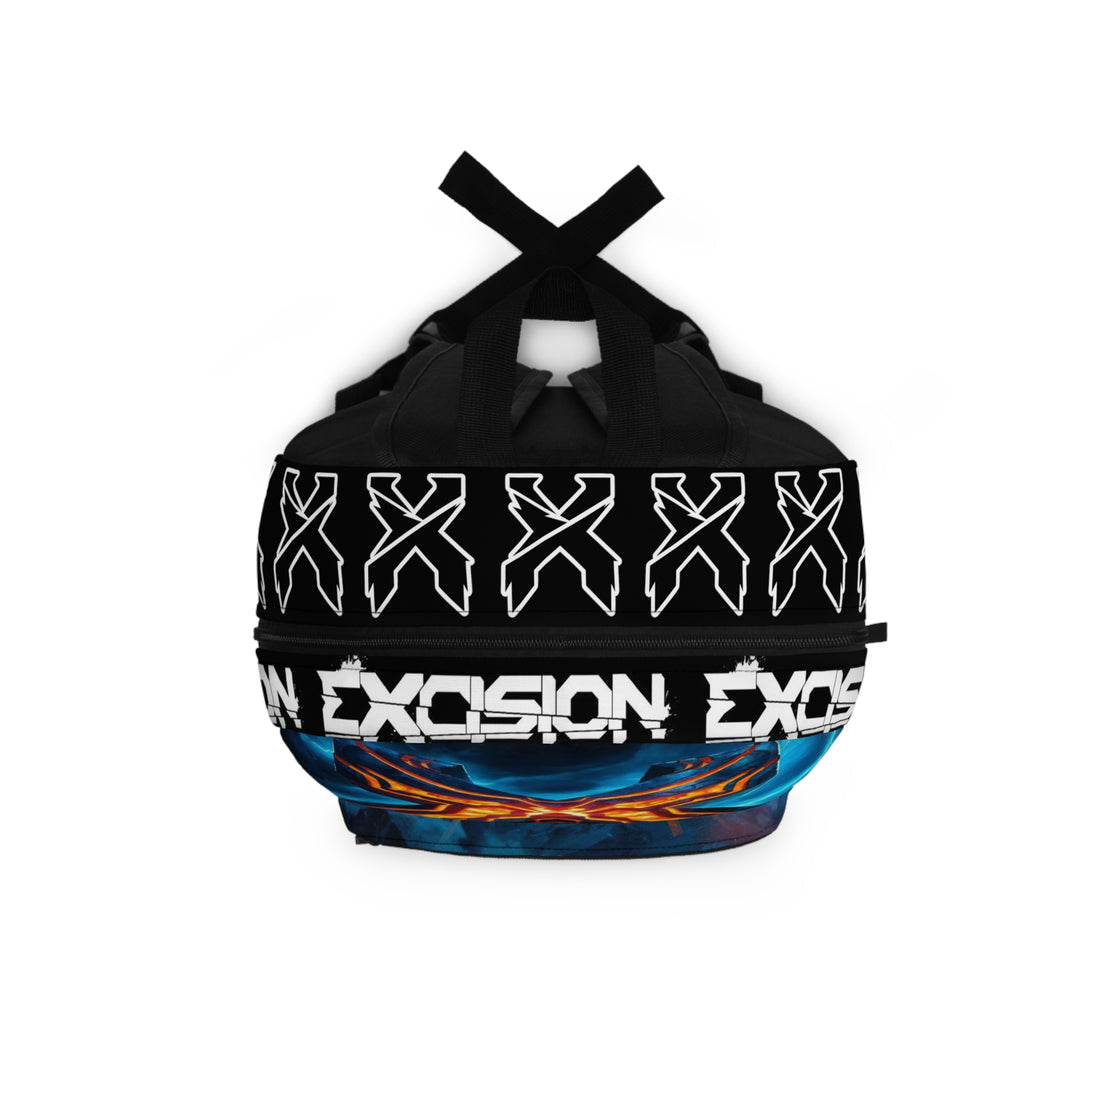 Excision Festival Backpack